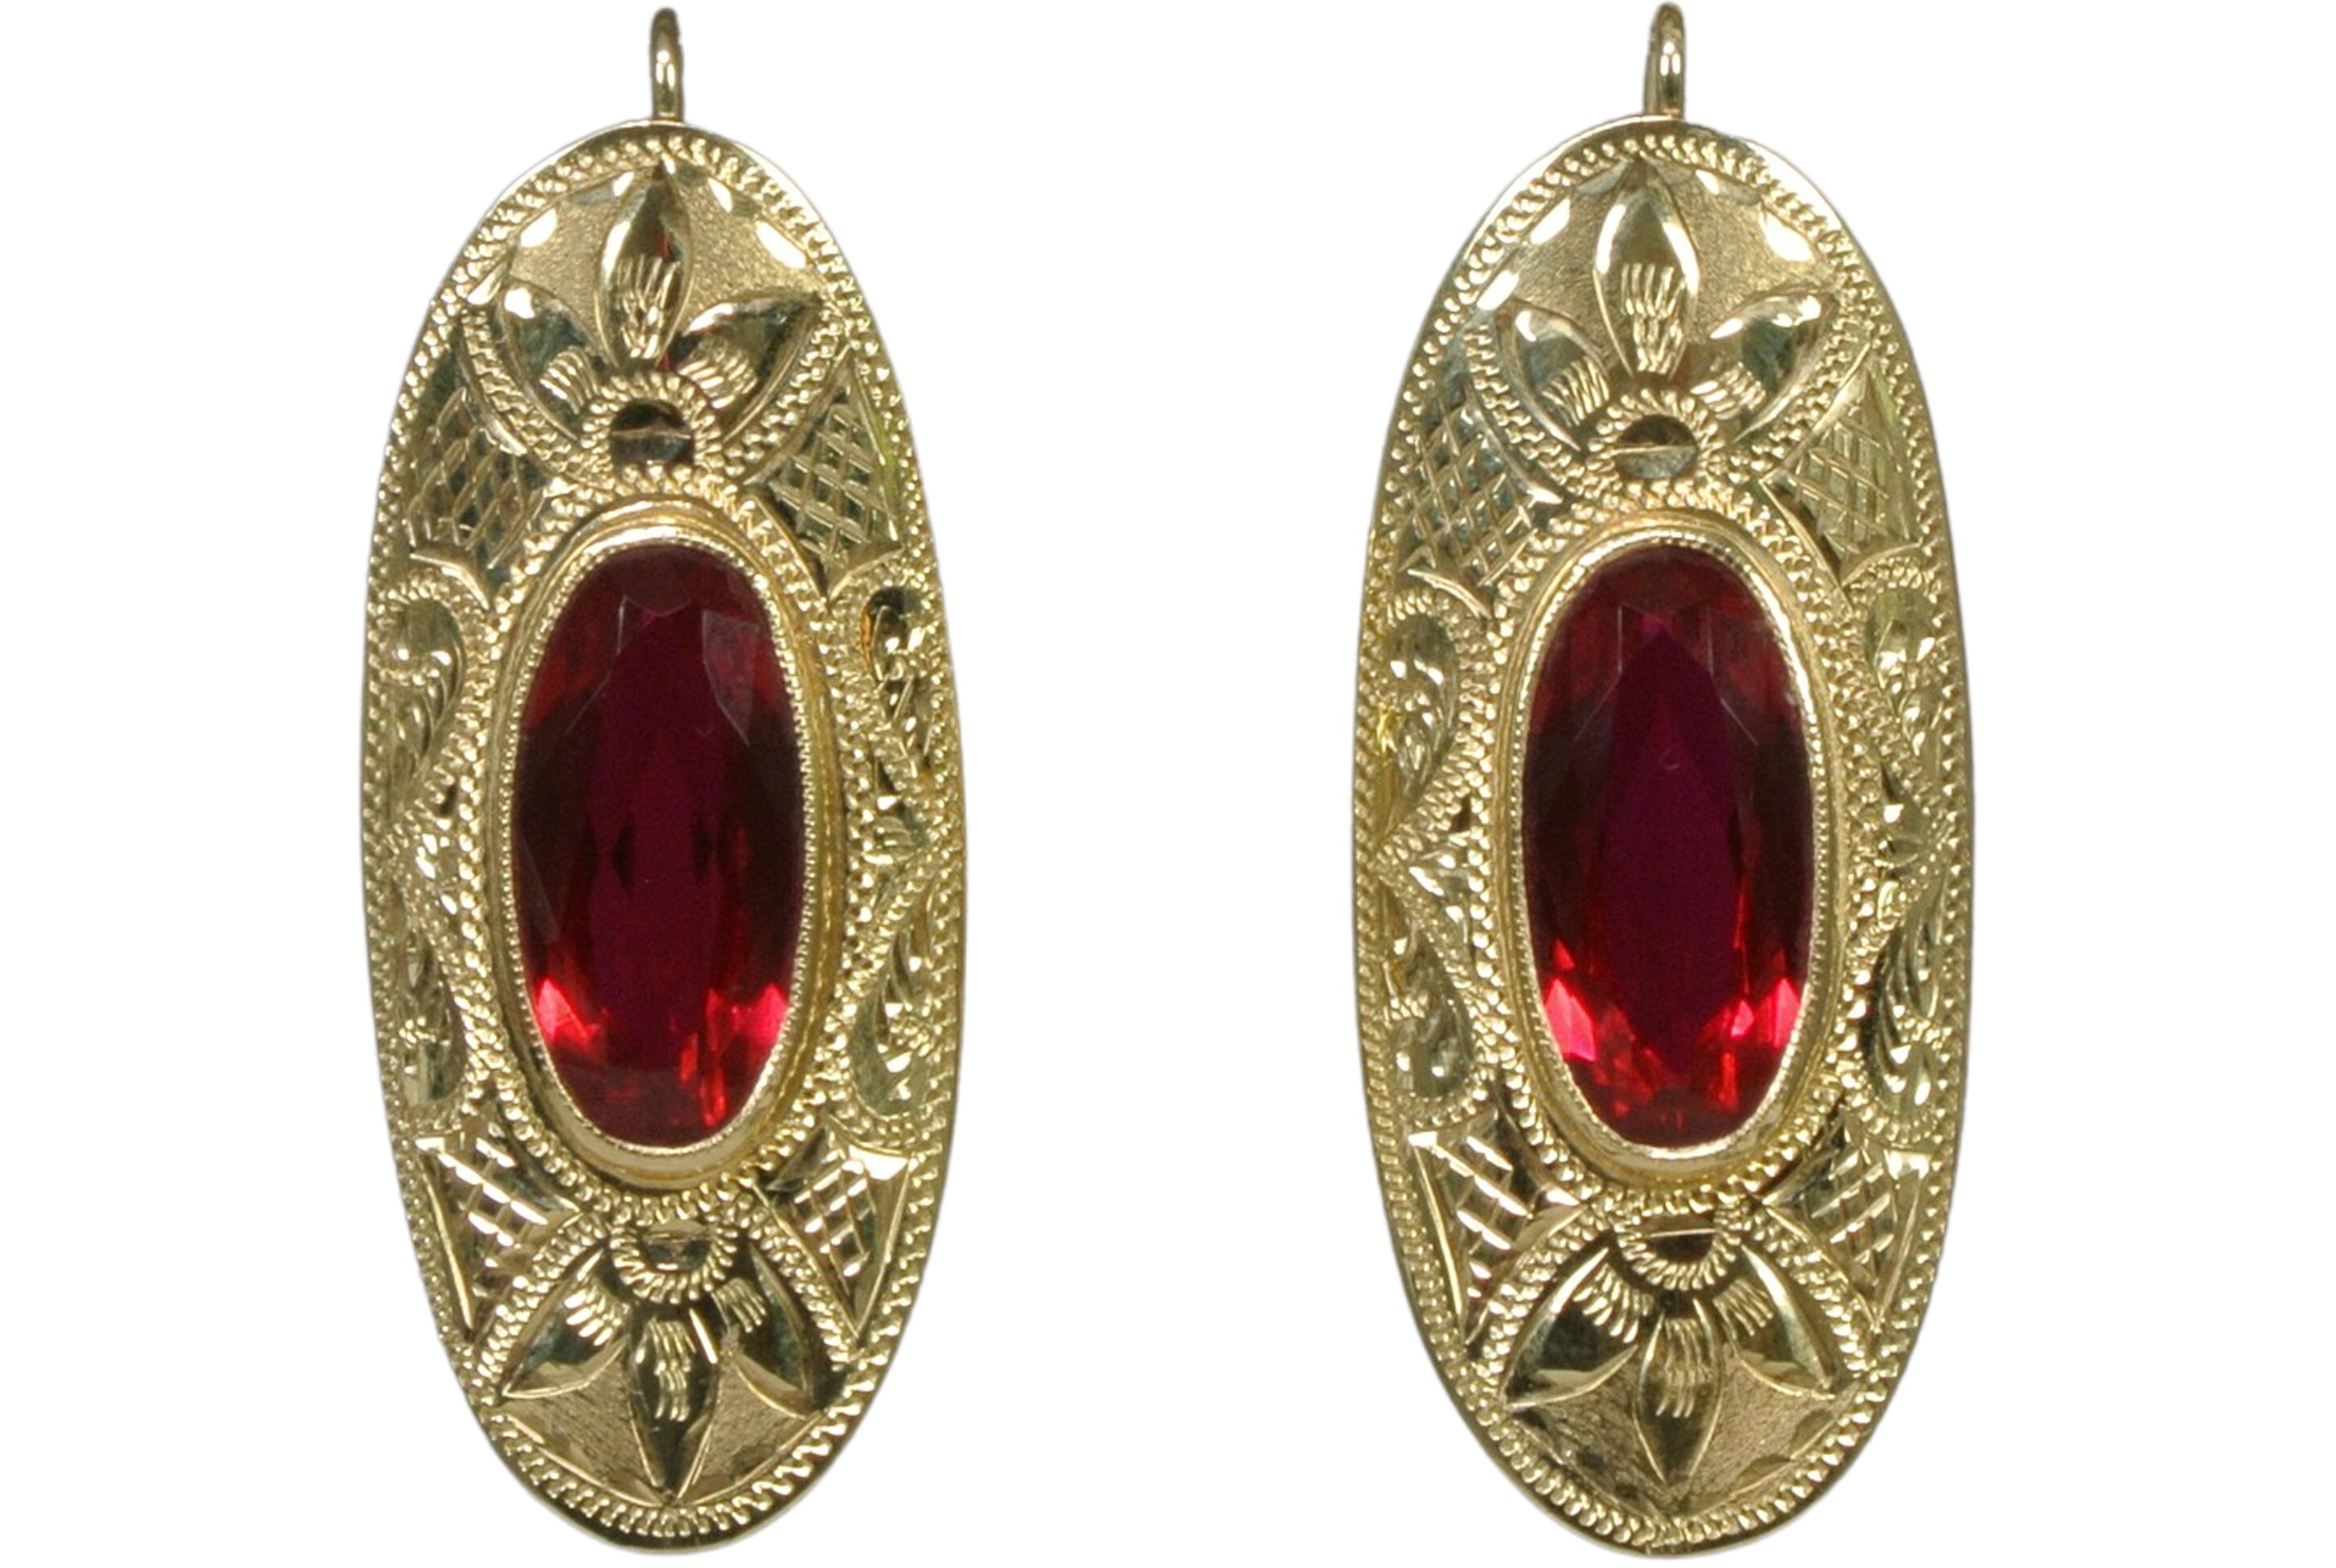 Solid gold earrings with red zircon and engraving